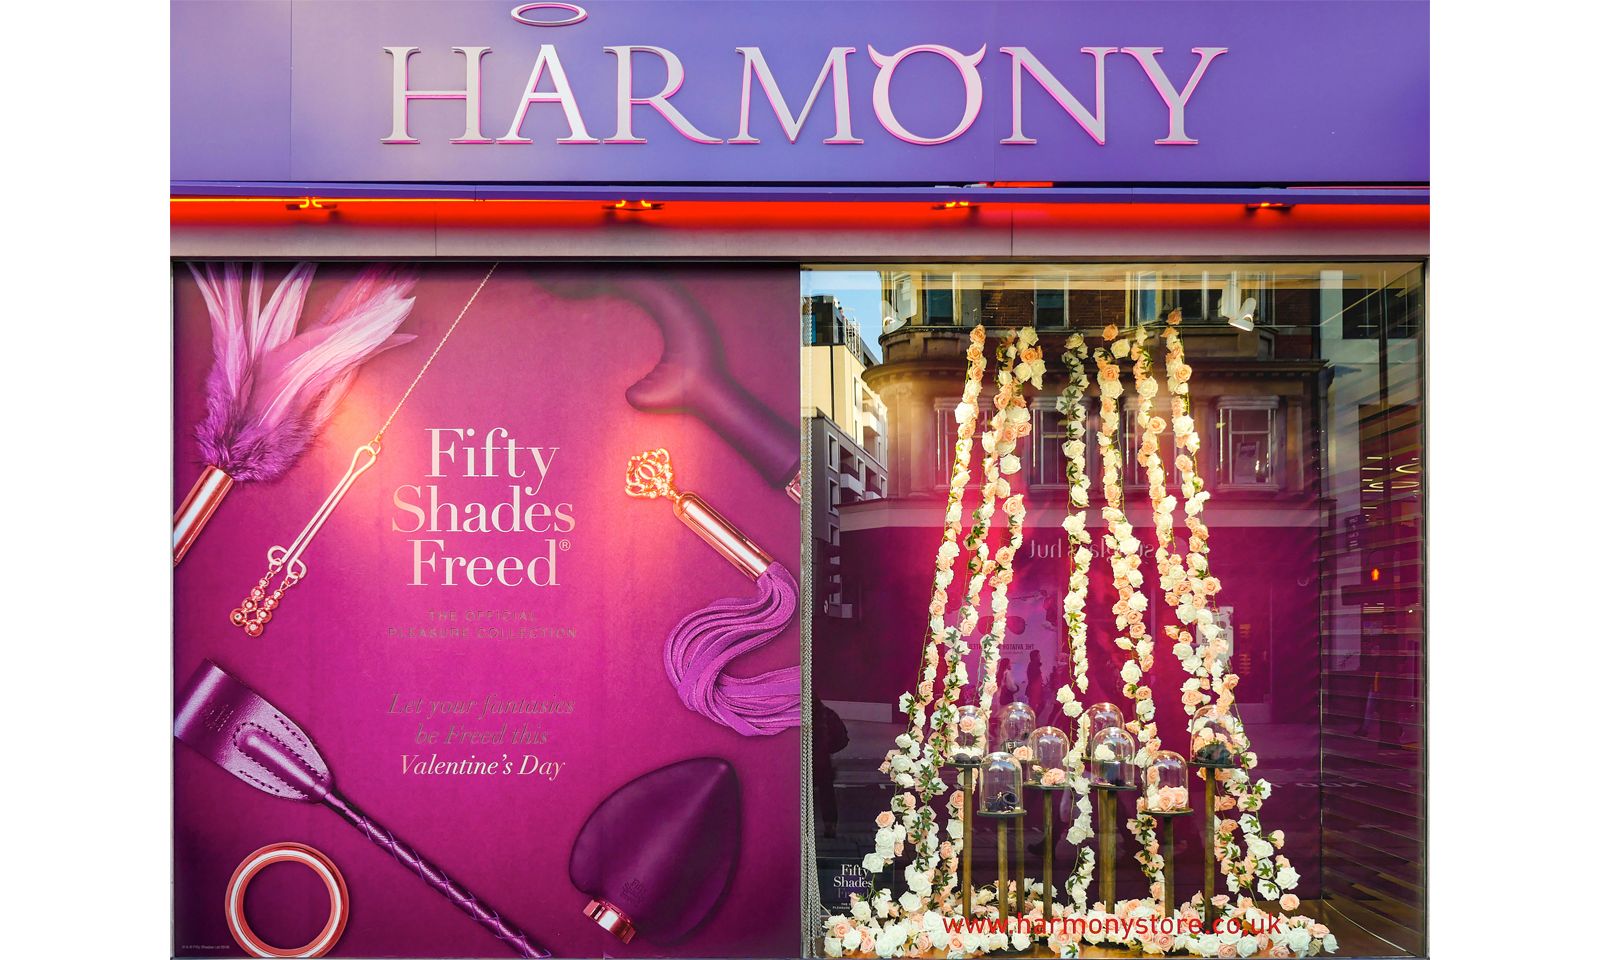 Lovehoney Seeing Sales Spike Thanks to ‘Fifty Shades Freed’ DVD